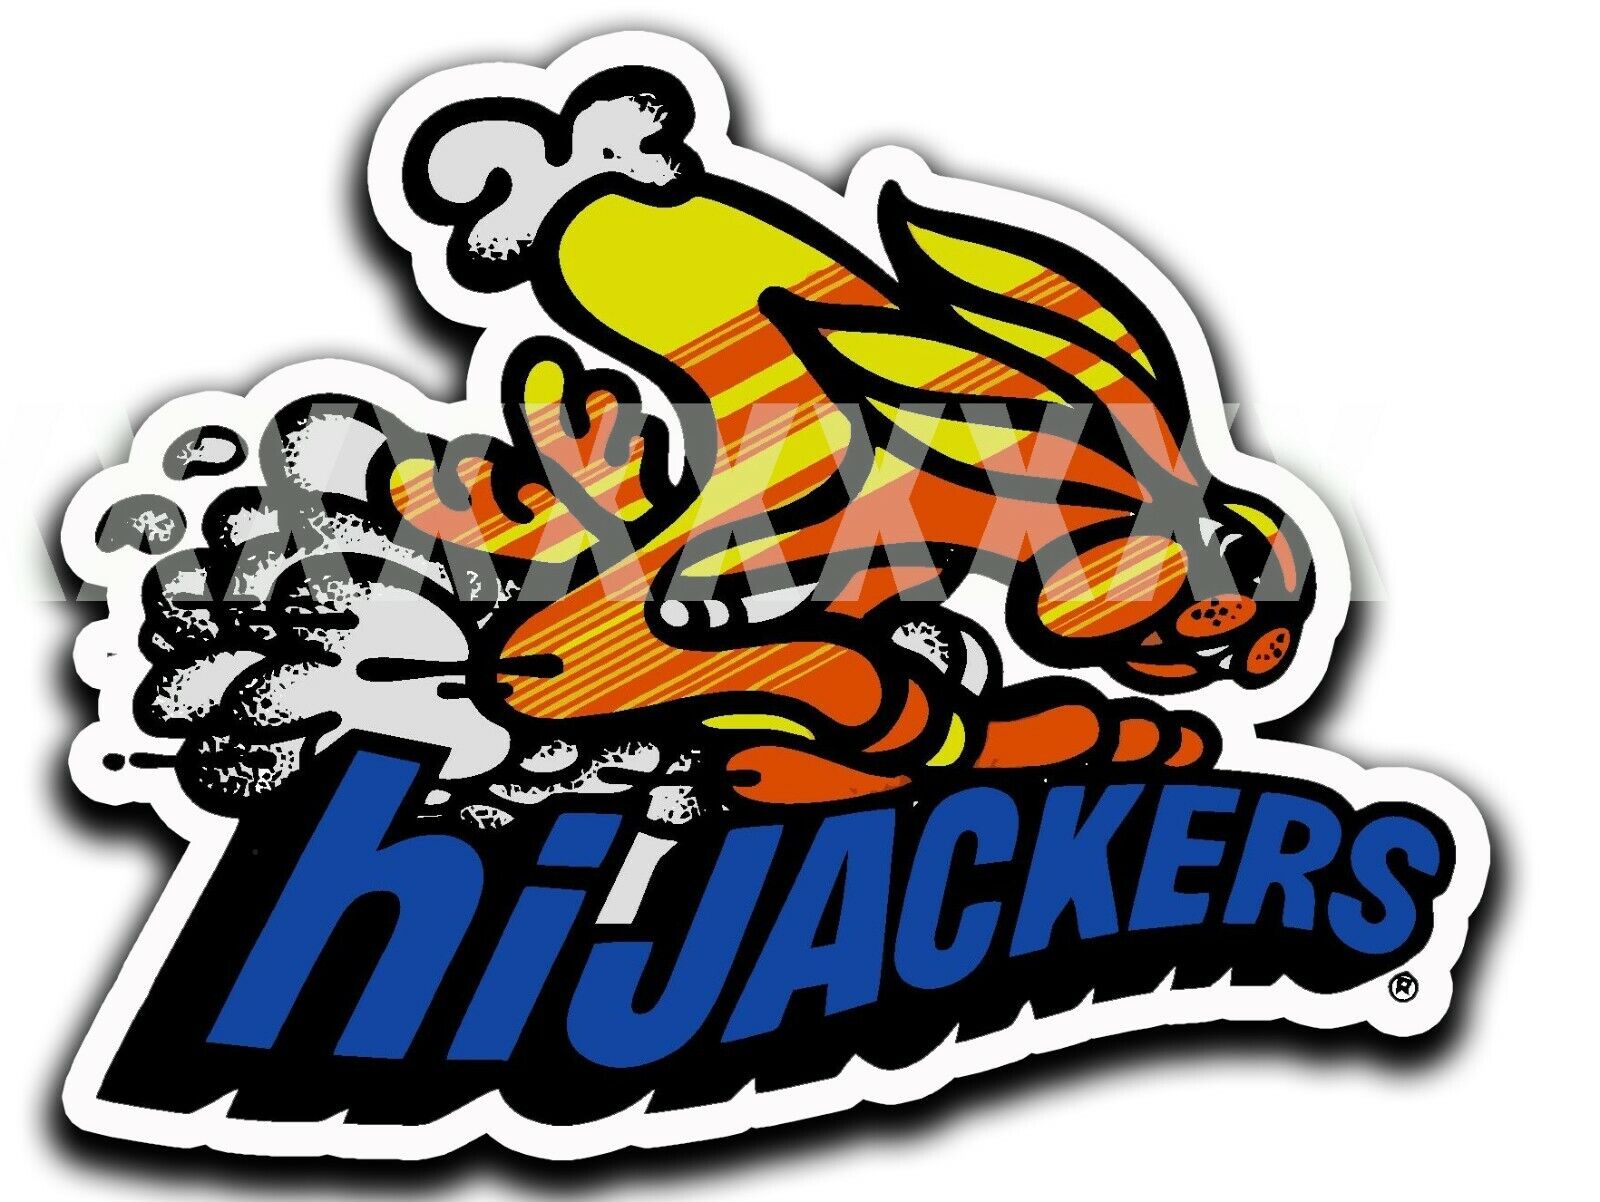 HIJACKERS RAT ROD OLD SCHOOL HOT RODS MUSCLE CAR VINTAGE DECAL STICKER